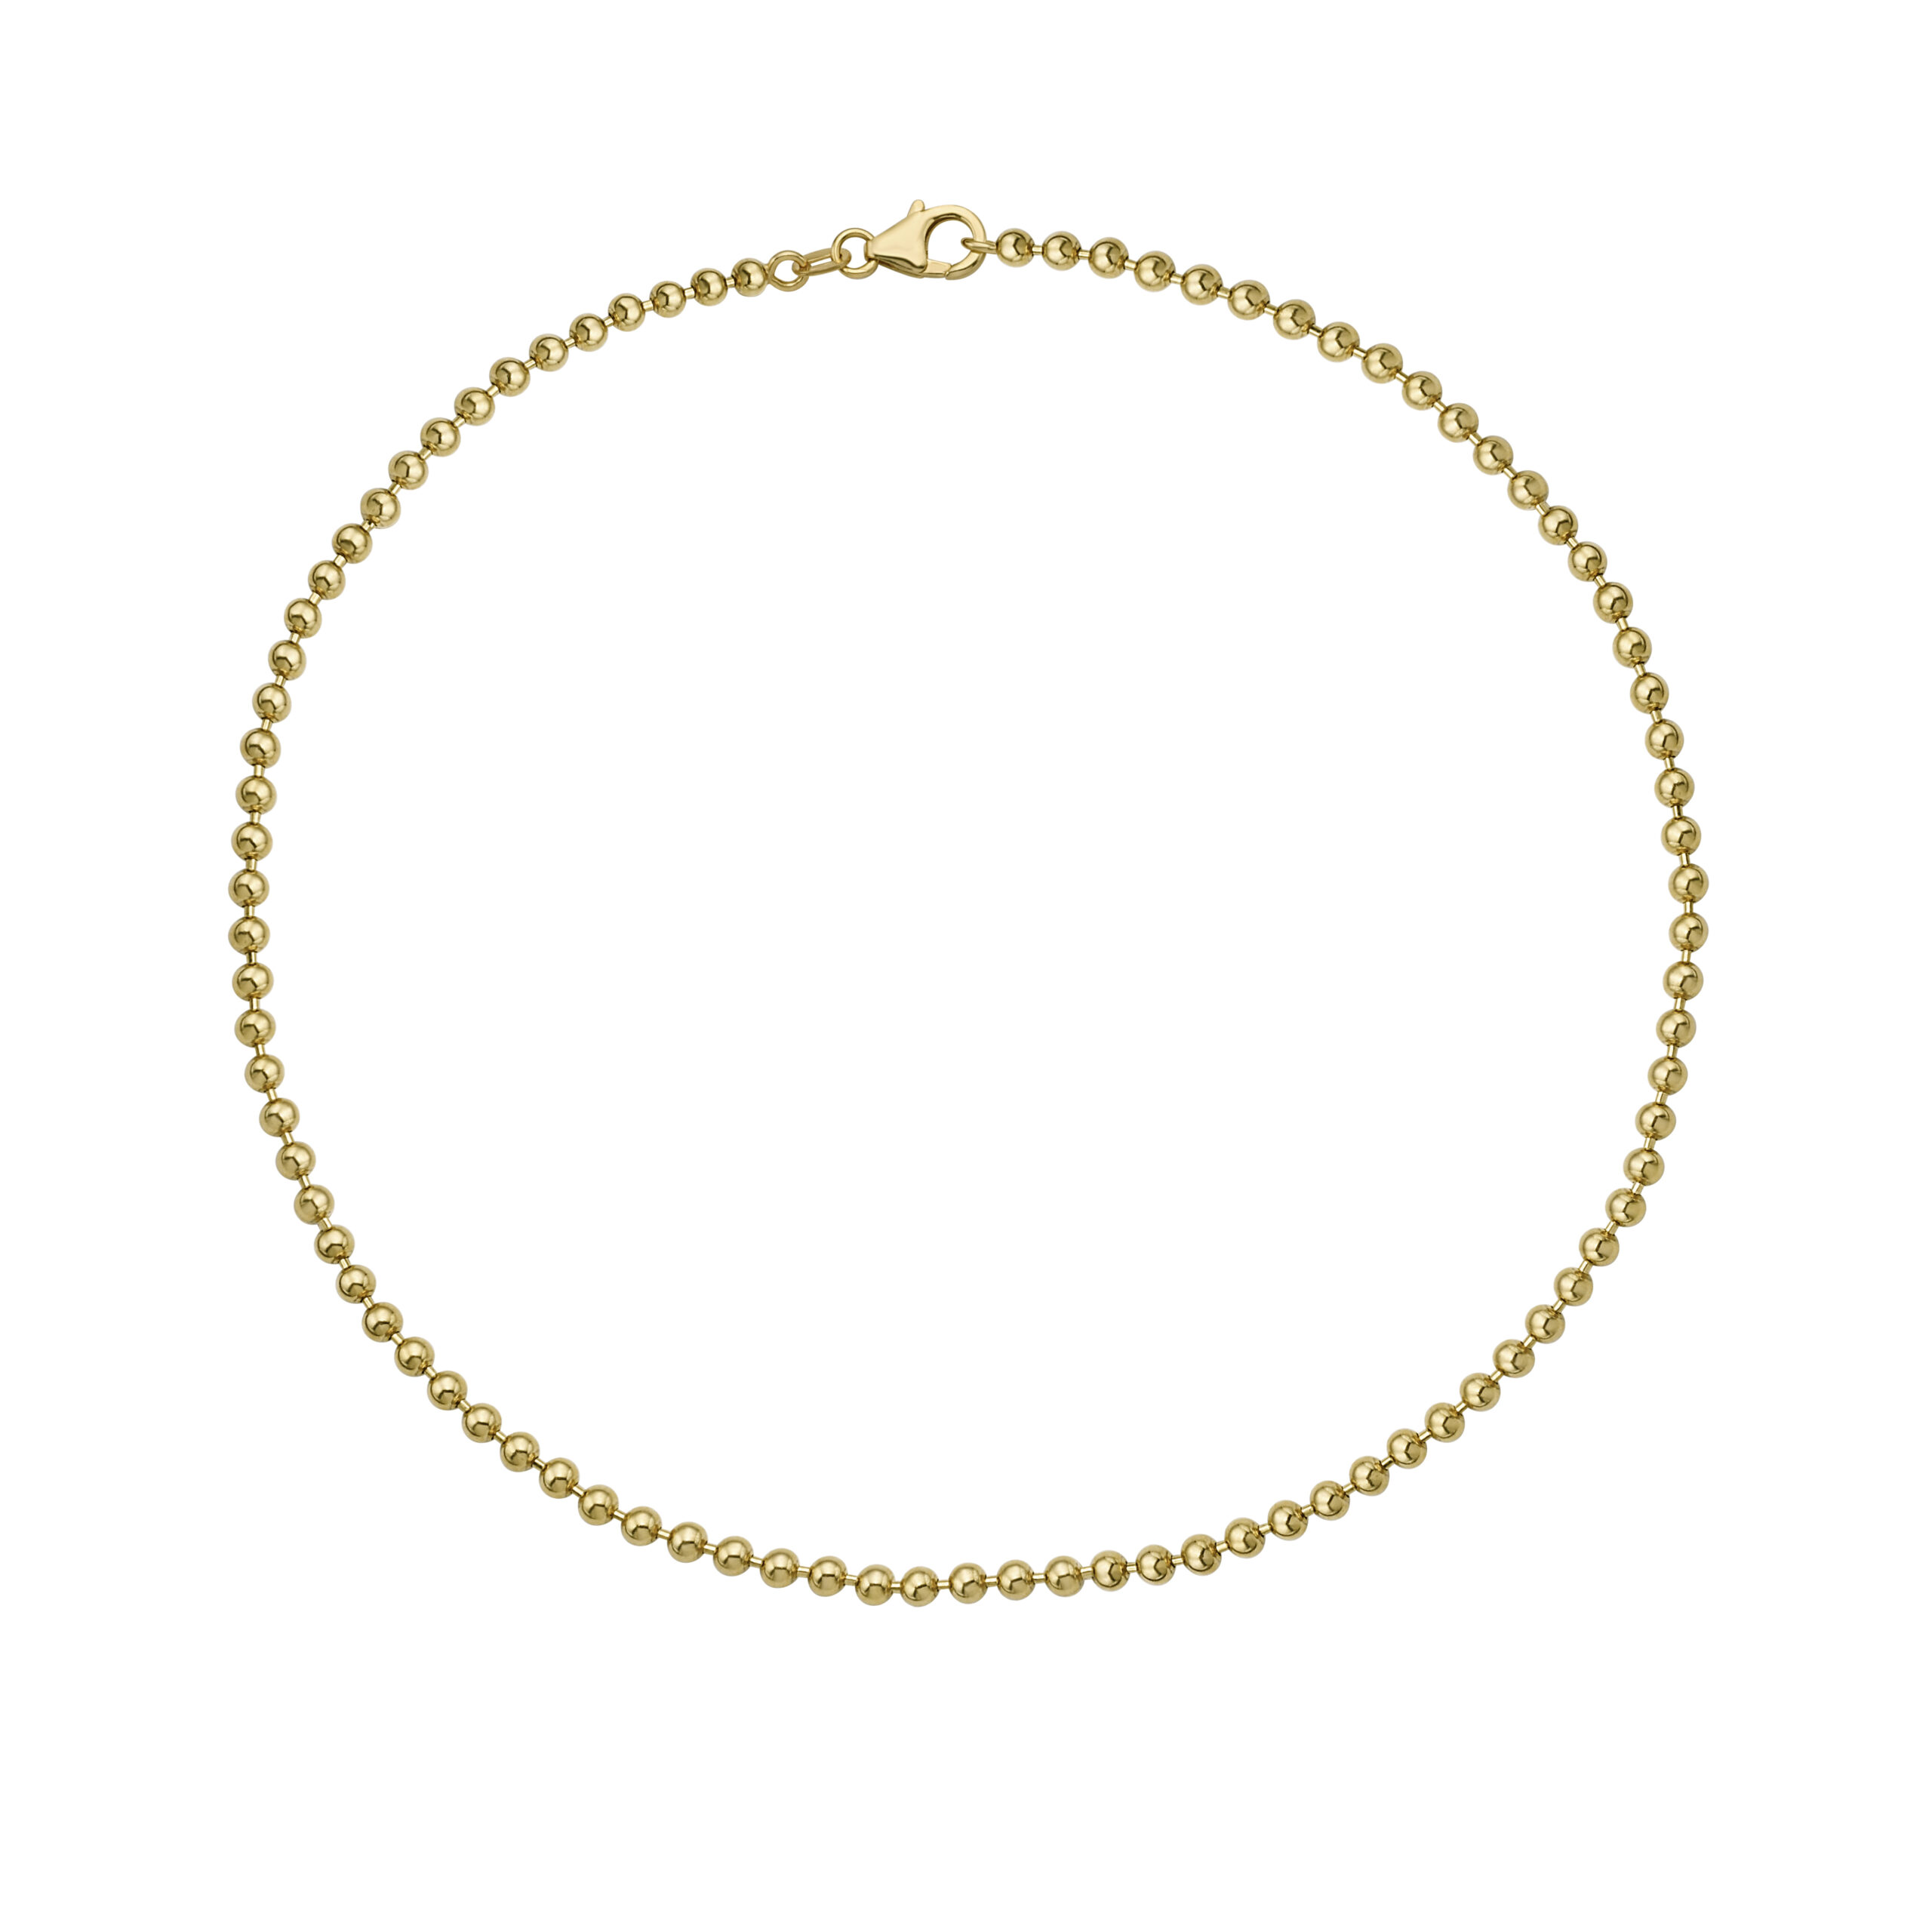 Gold Ball Link Chain in 14K Yellow Gold